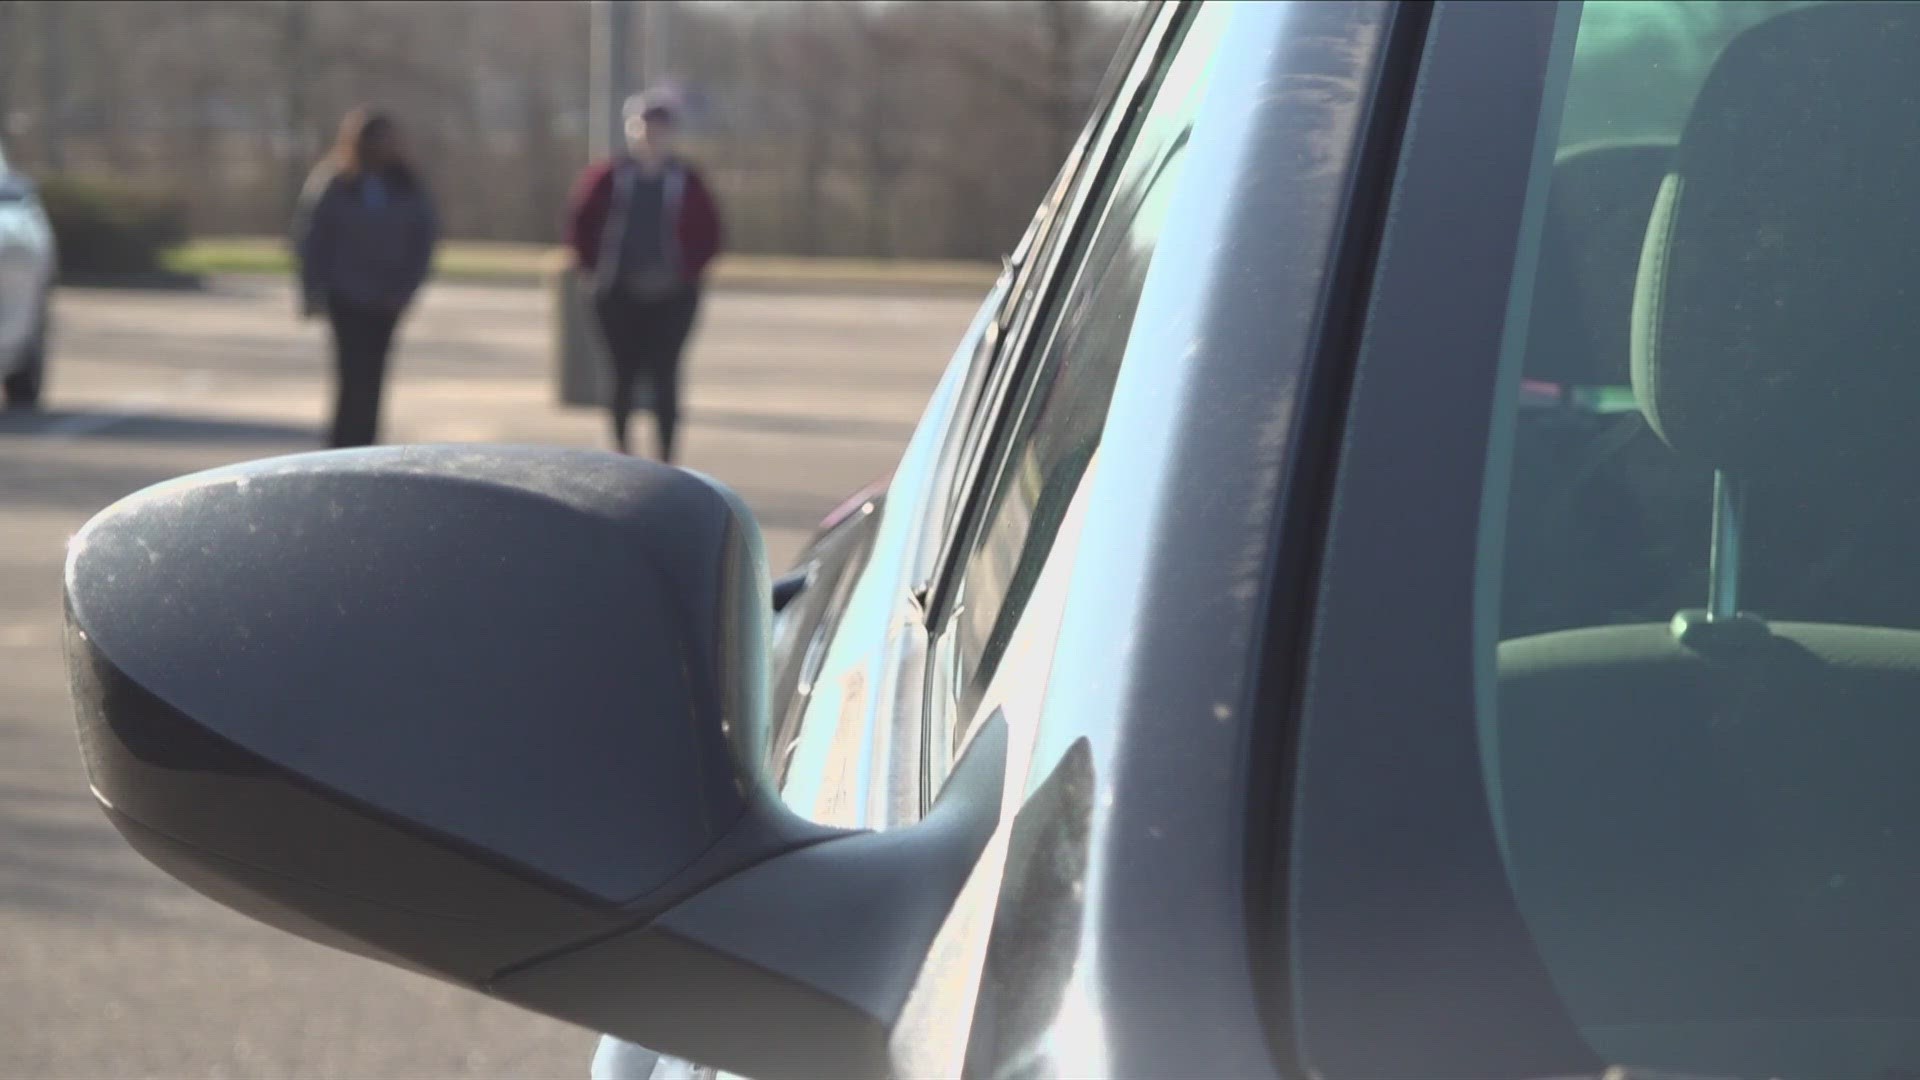 With more than 300 cars stolen during the first two months of 2024, Memphians are frustrated across the city. ABC24 looked into MPD's policies and procedures.